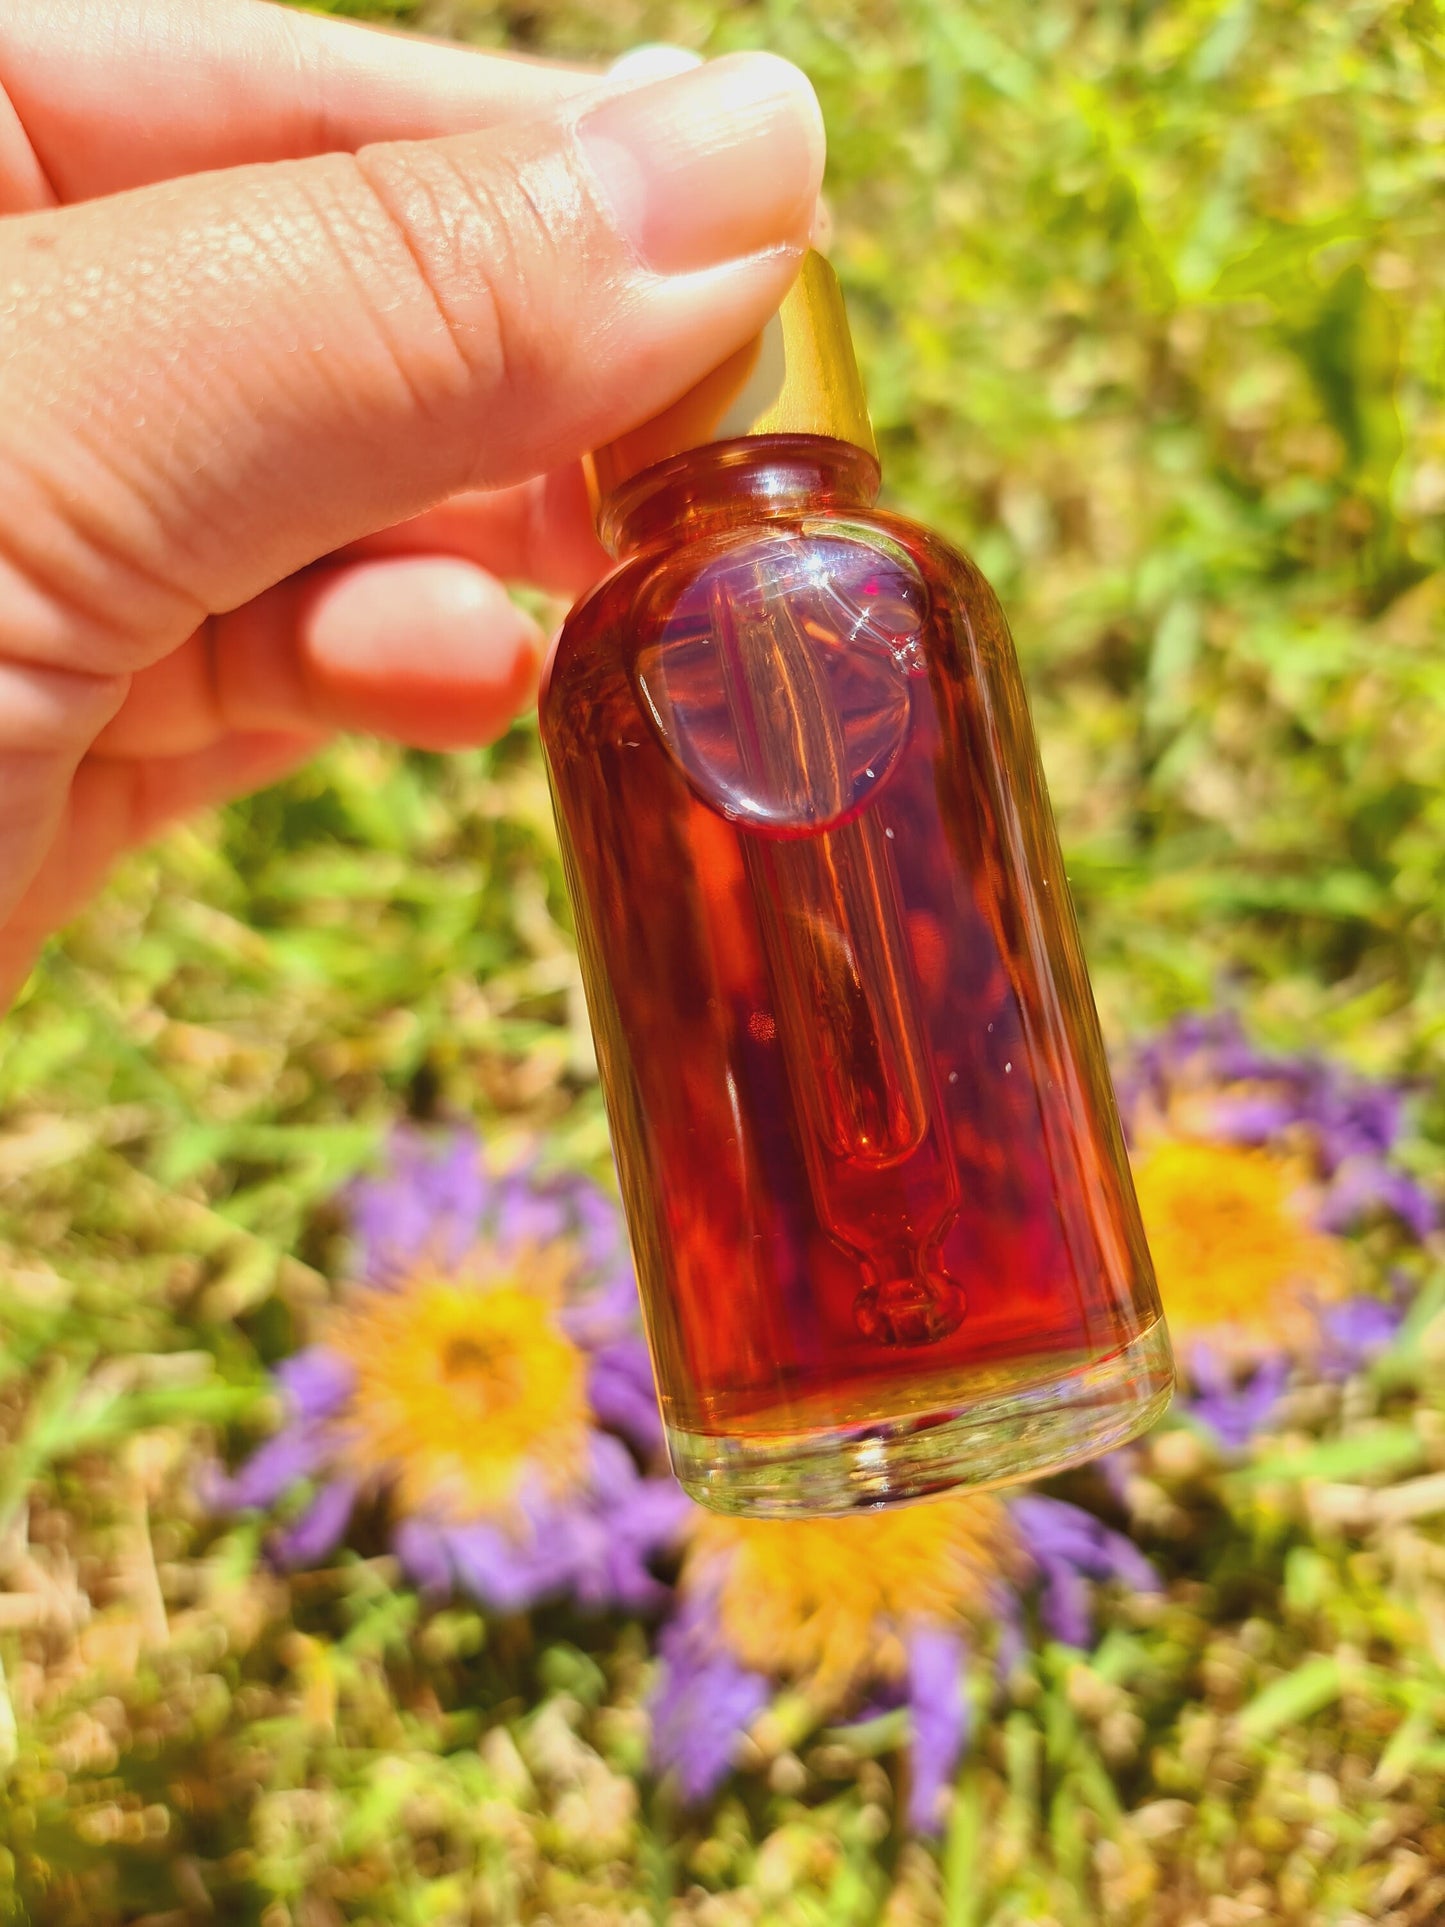 The Astral Elixir Tincture